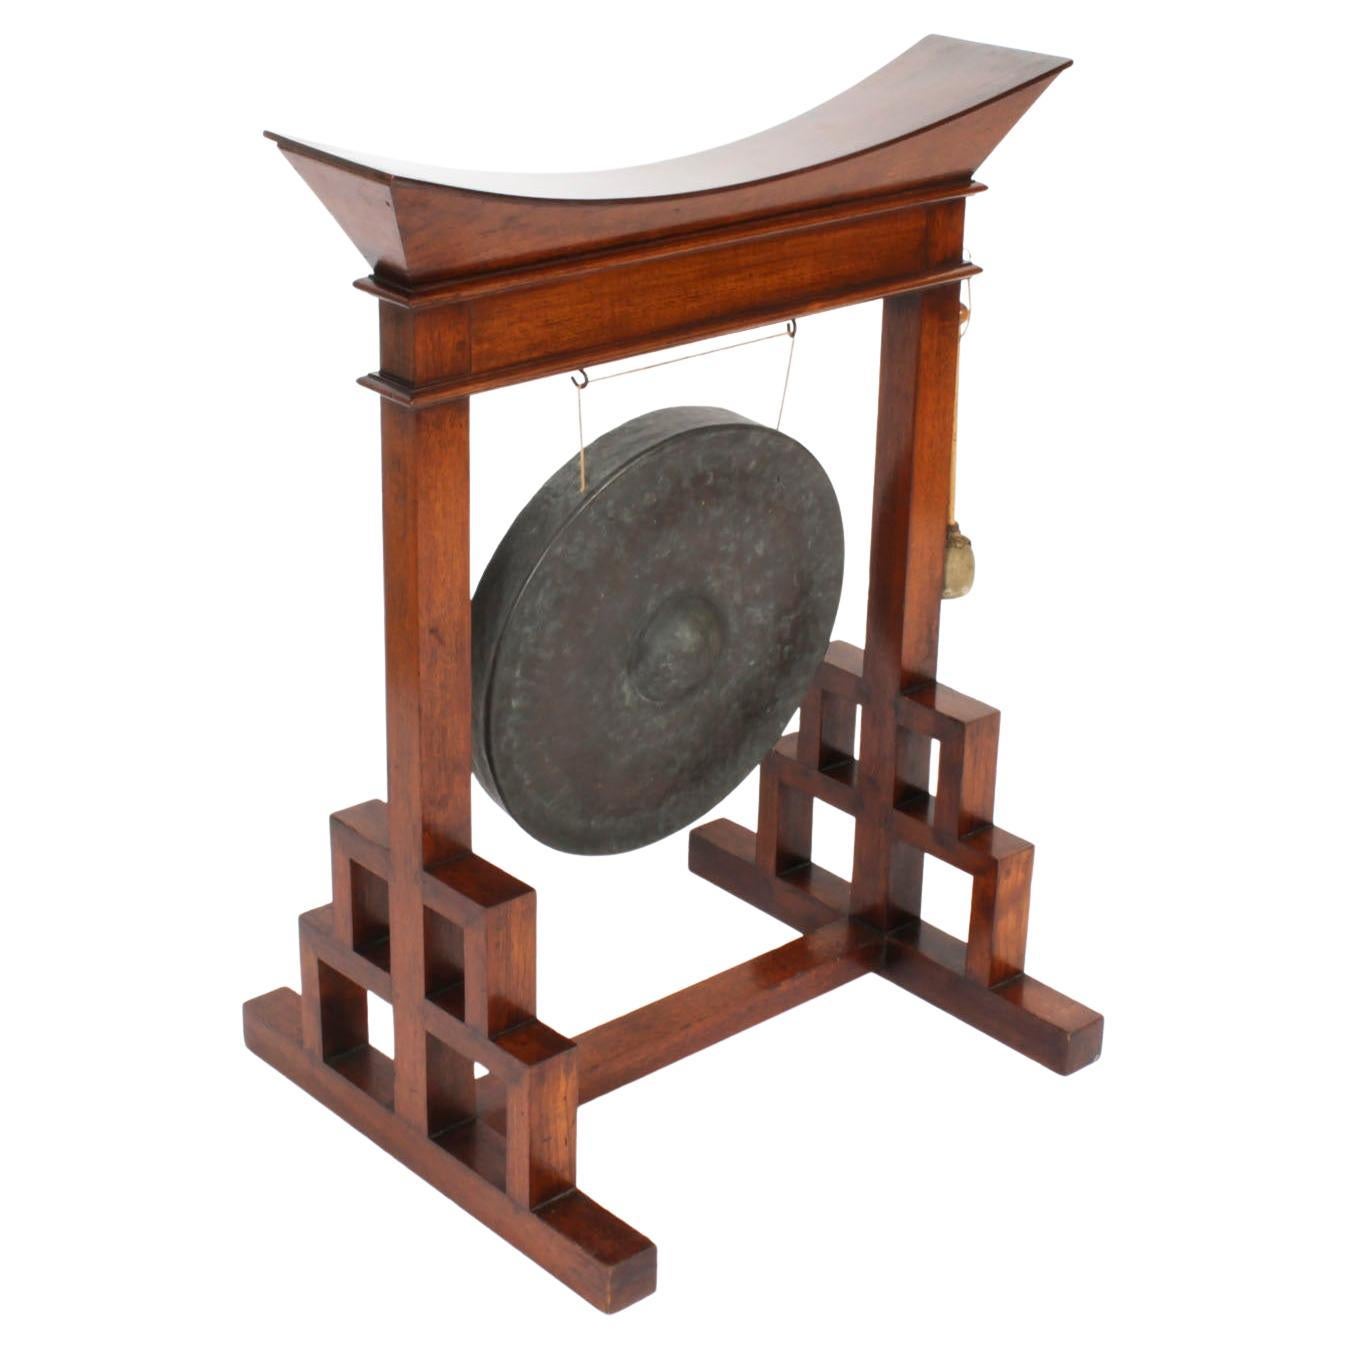 What does a gong symbolize?